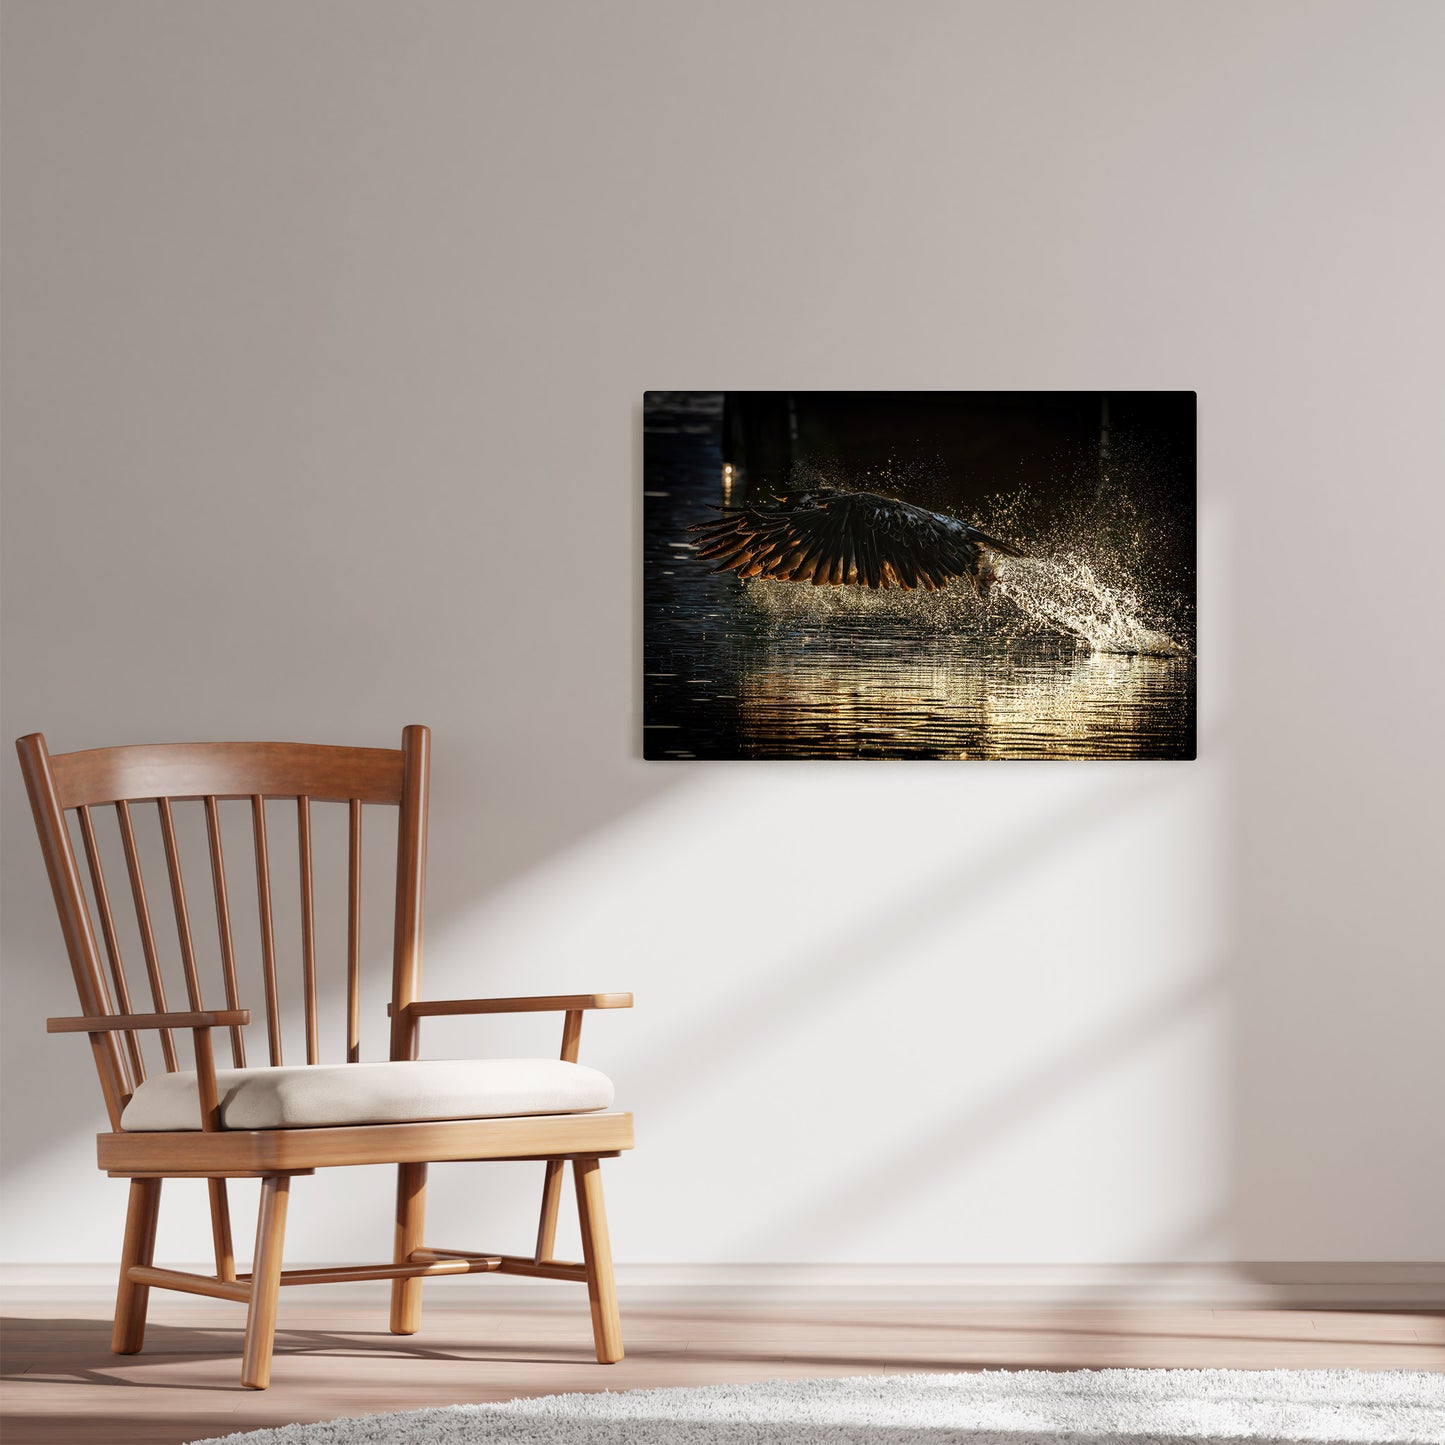 Ray Mackey's Eagle's Retrieving Light  photography reproduced on HD metal print and displayed on wall